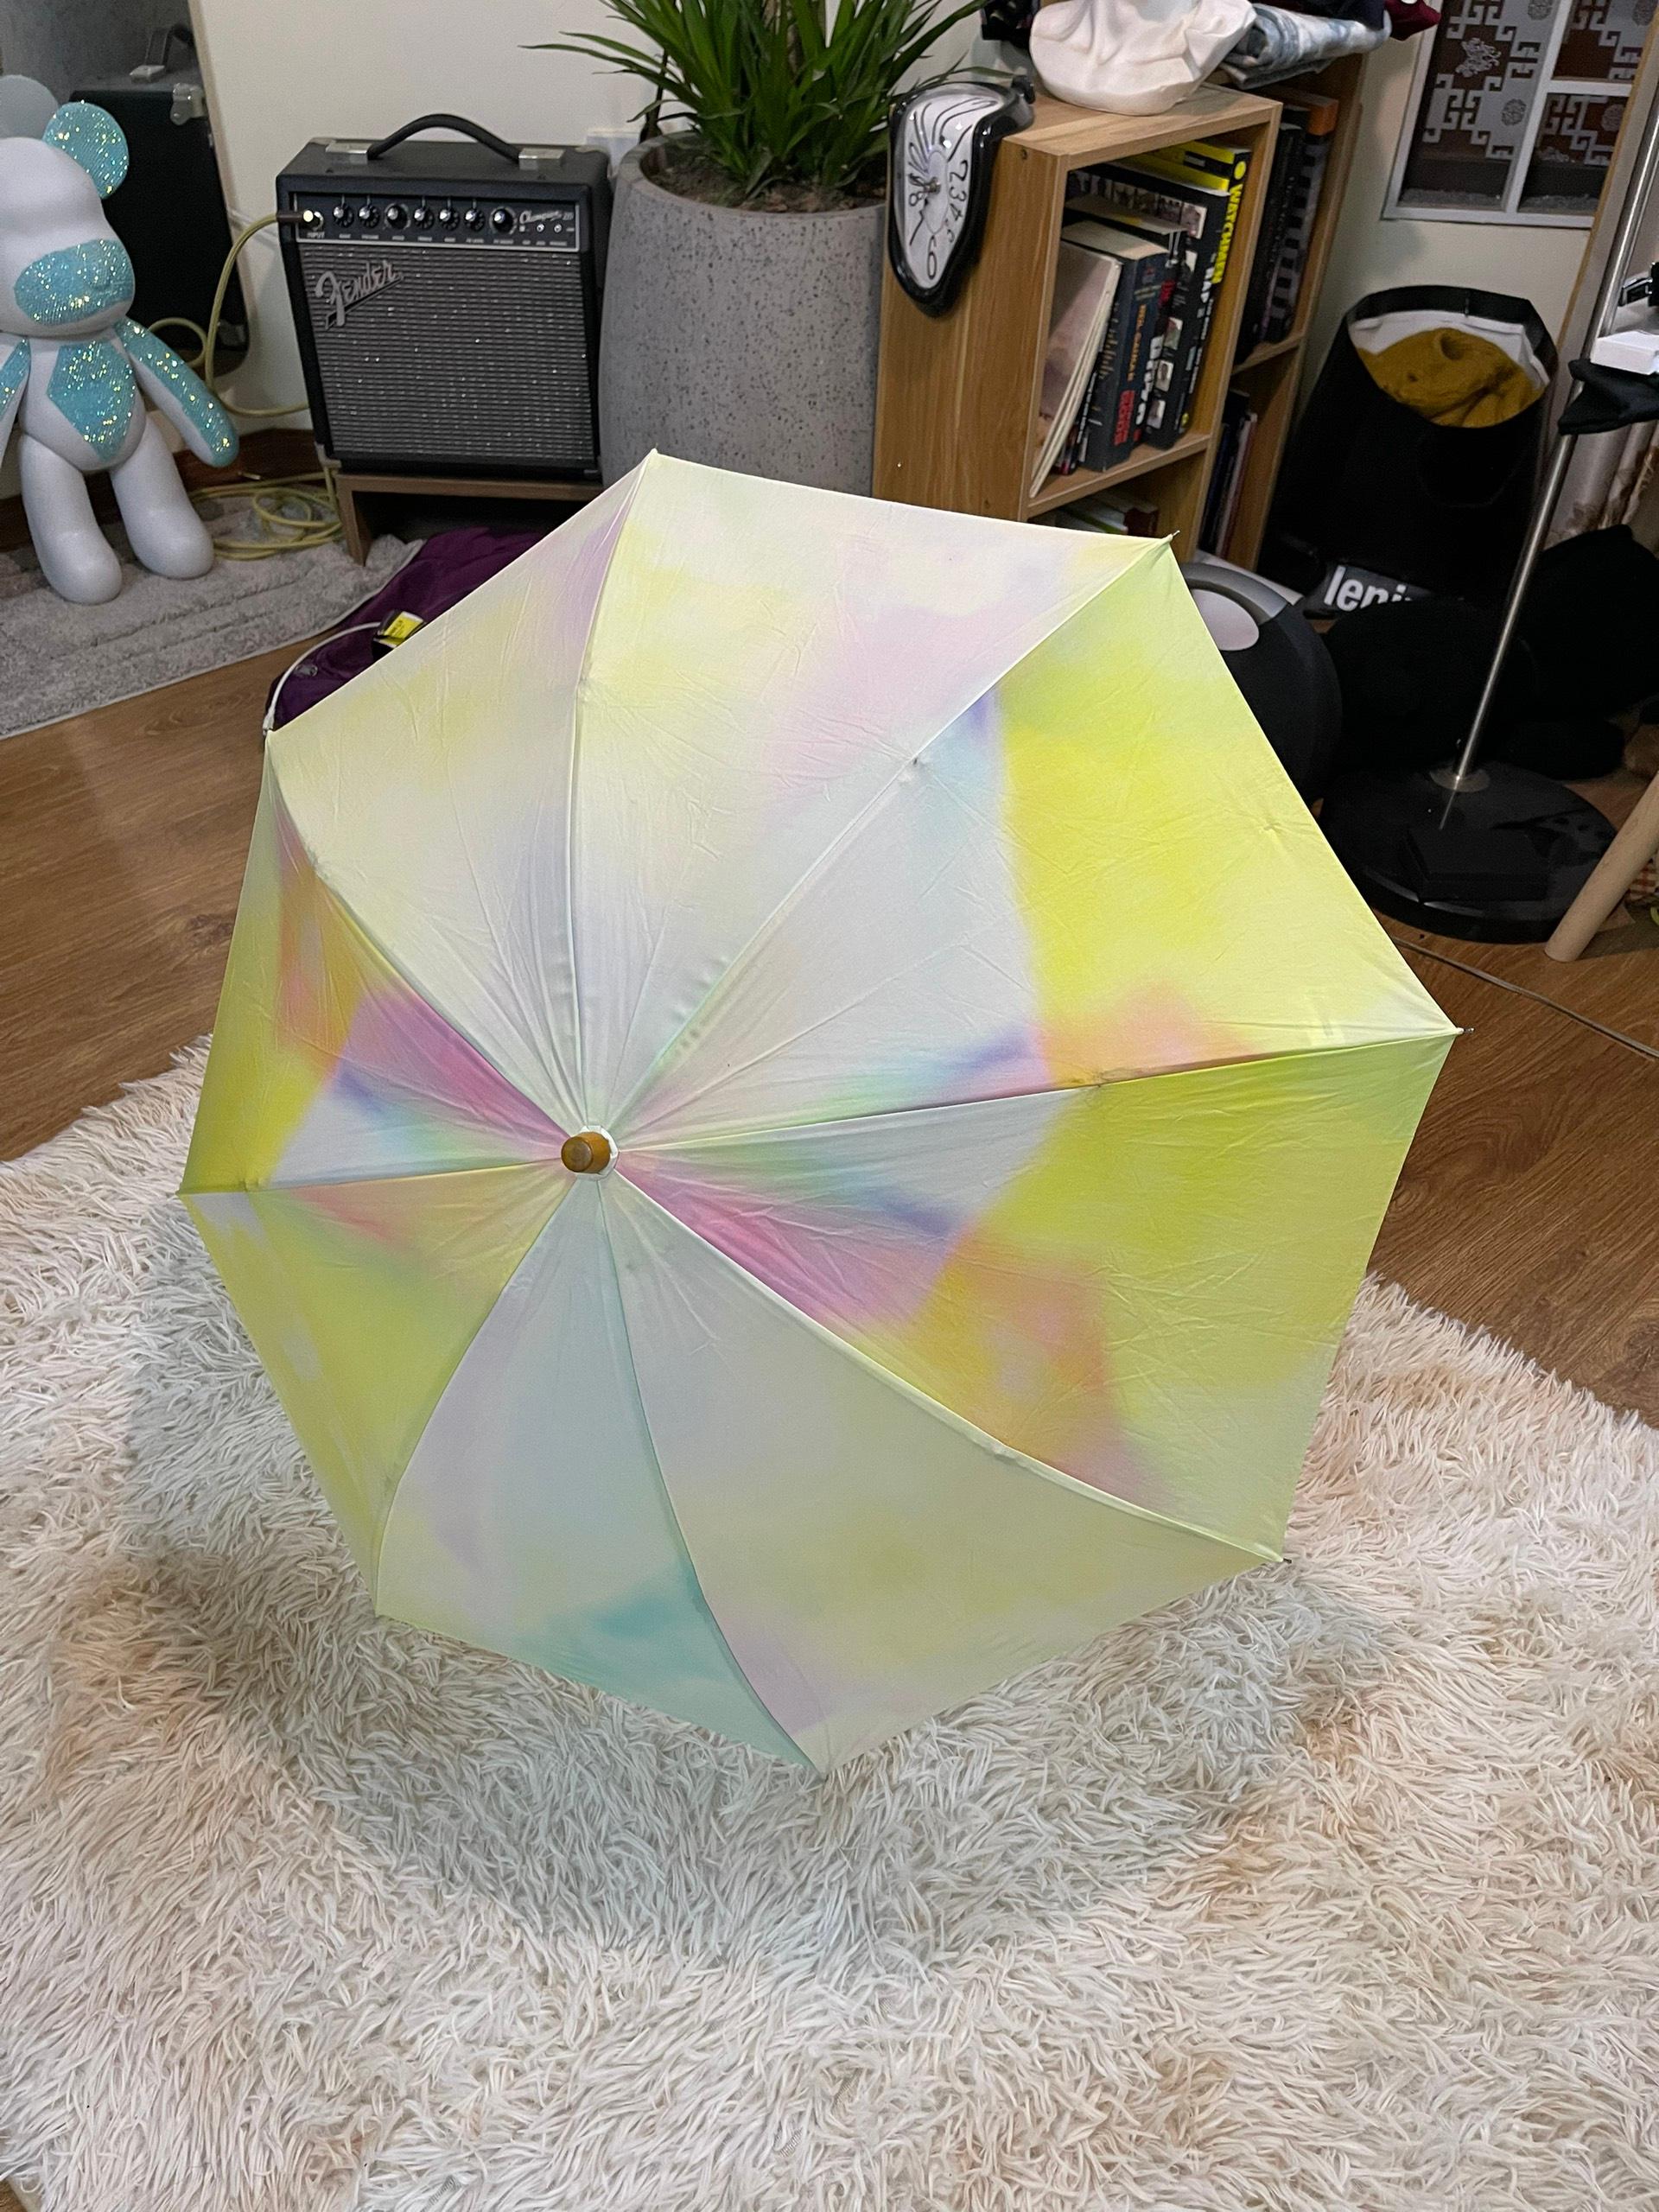 Gradient rainbow umbrella from mainline Issey Miyake, season unknown

Size: OS

Condition: 9/10. No significant flaws

Feels free to message me with any questions regarding inquiries